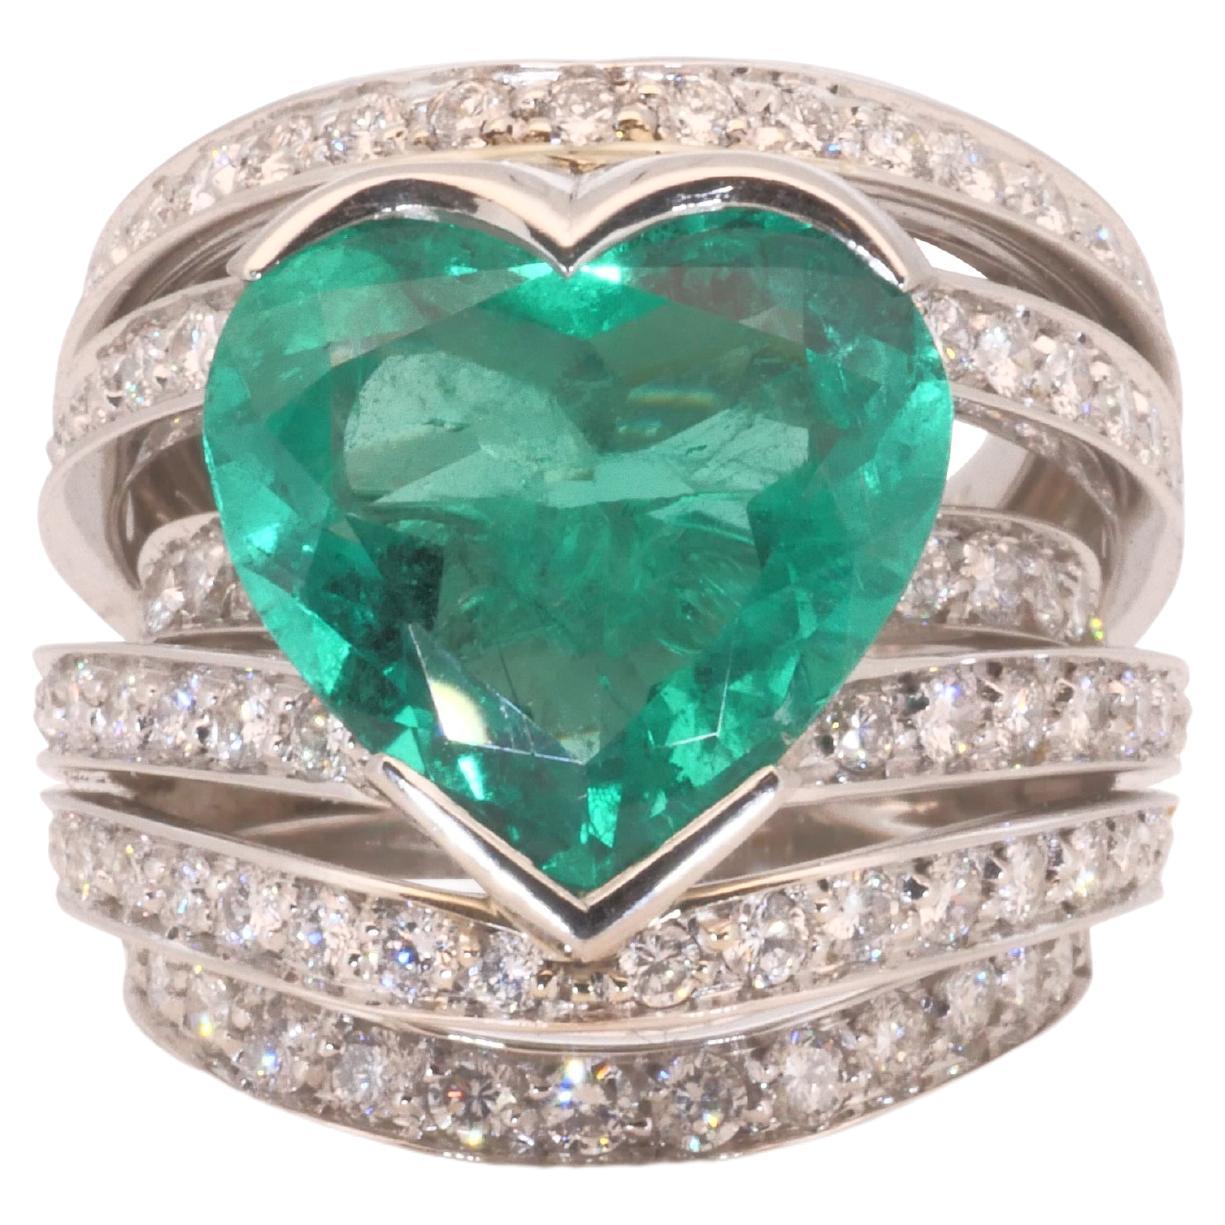 18k White Gold Heart Dome Ring 8.51 Carat Natural Emerald and Diamonds Grs Cert For Sale